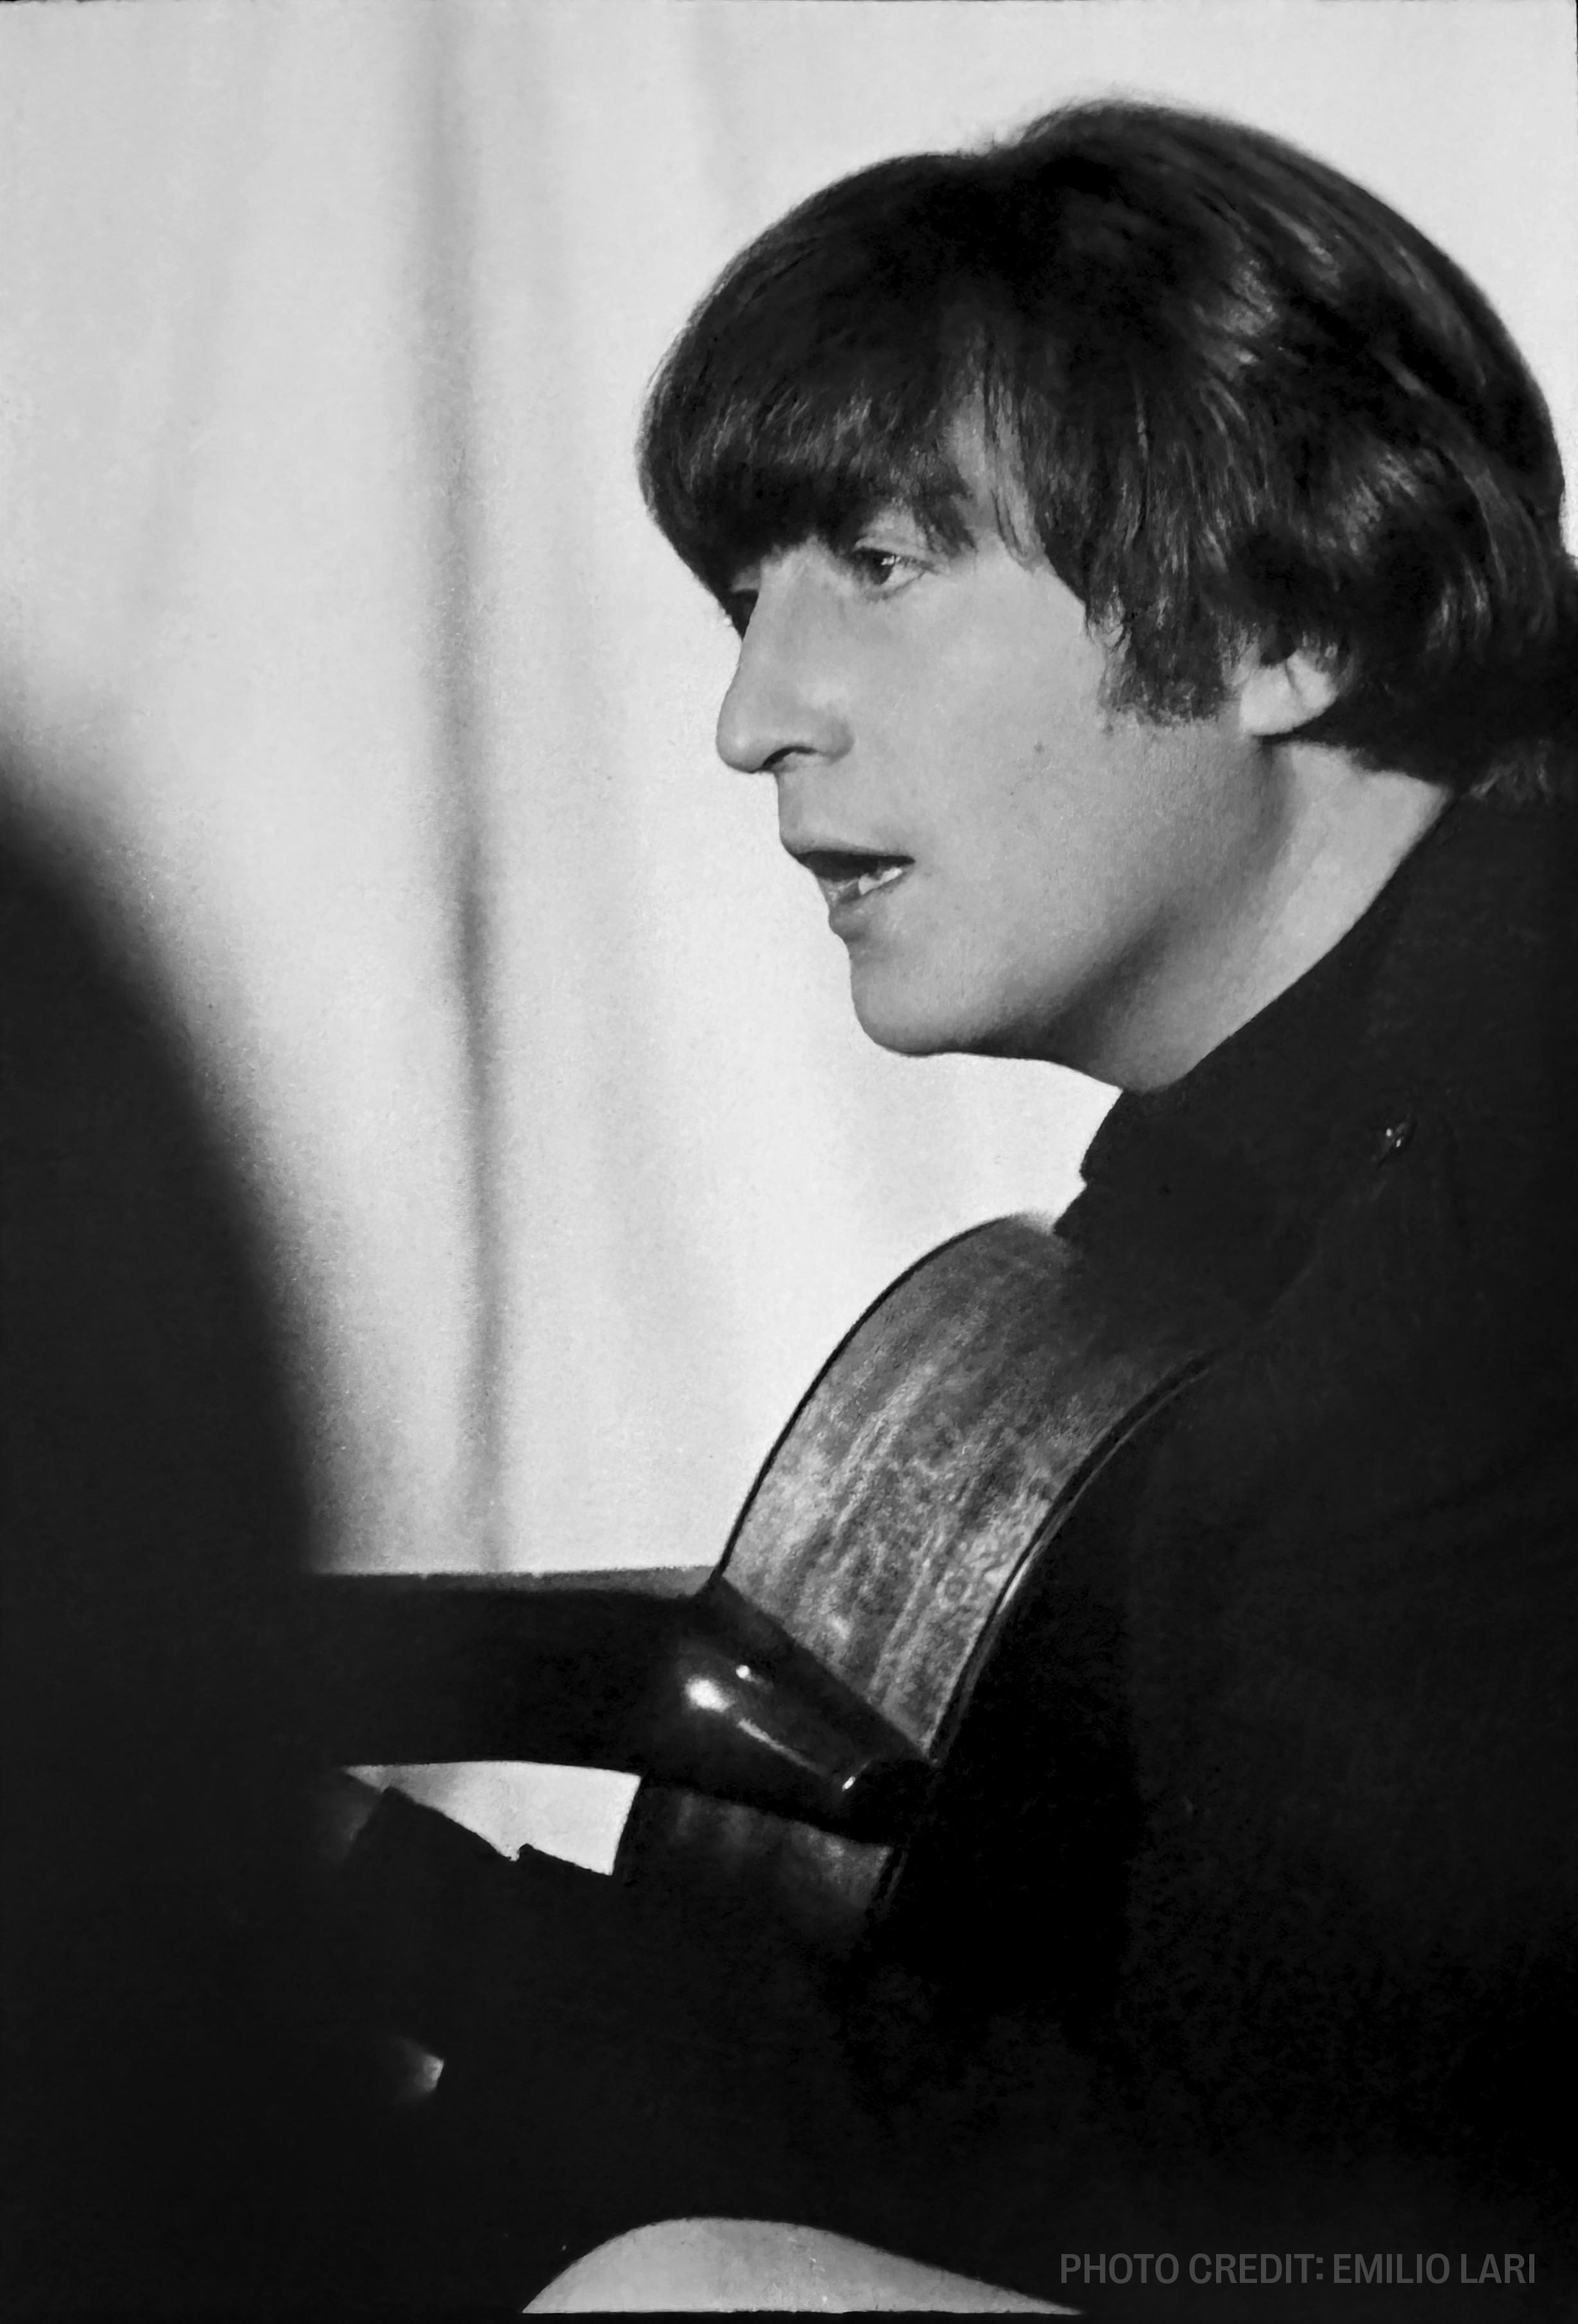 a black and white photo of john lennon playing a guitar